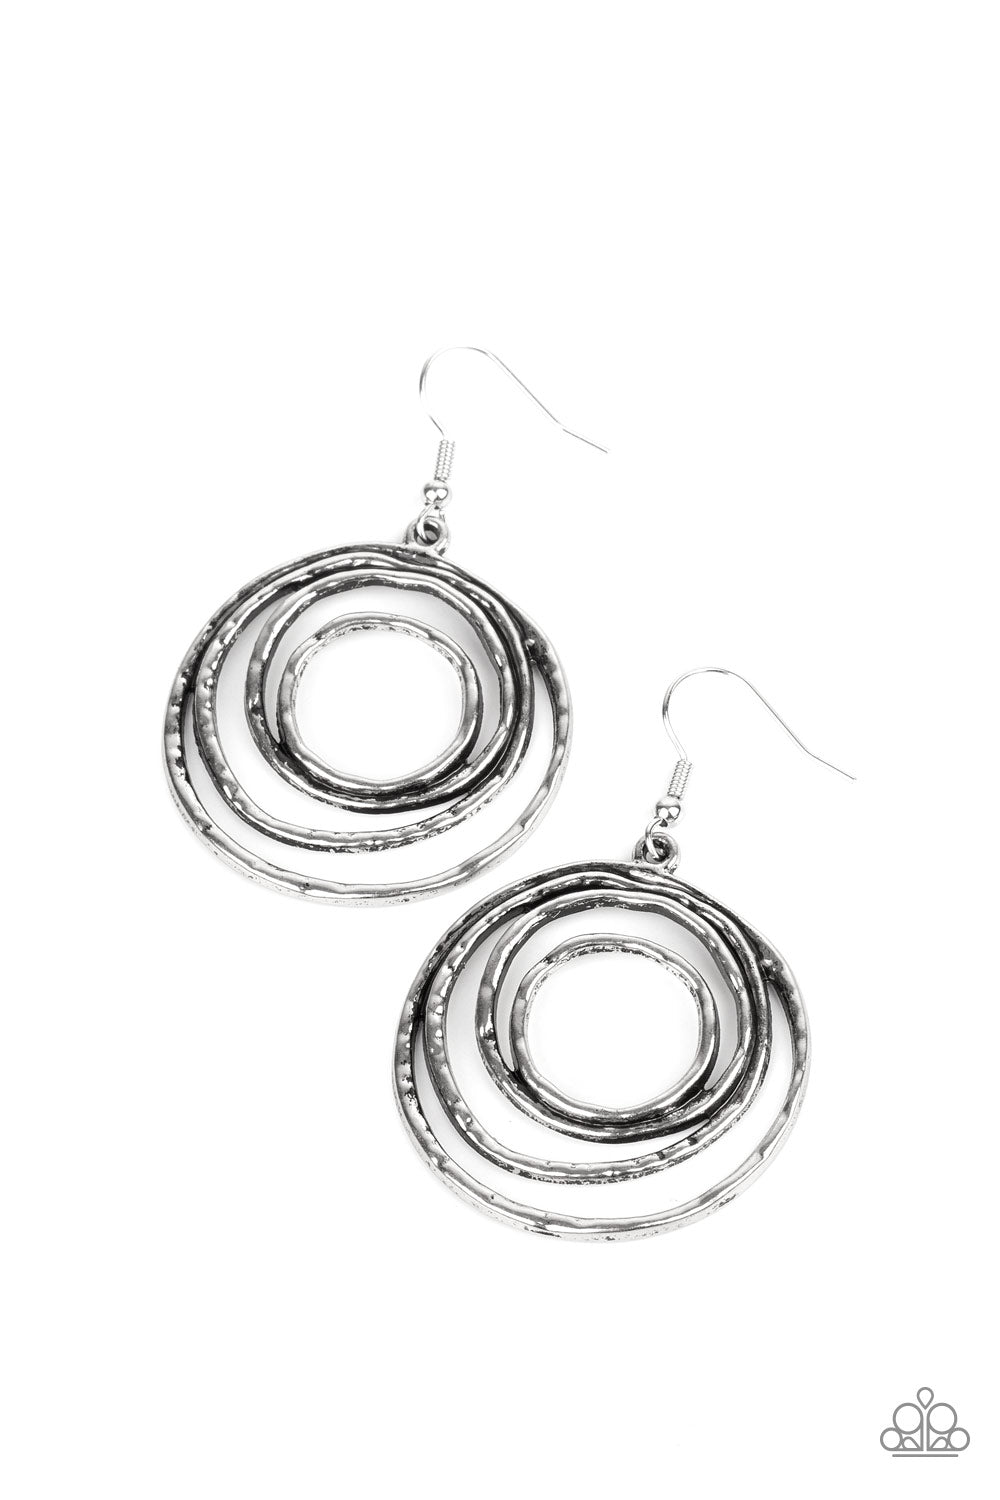 Spiraling Out of Control - Silver Earrings - Princess Glam Shop